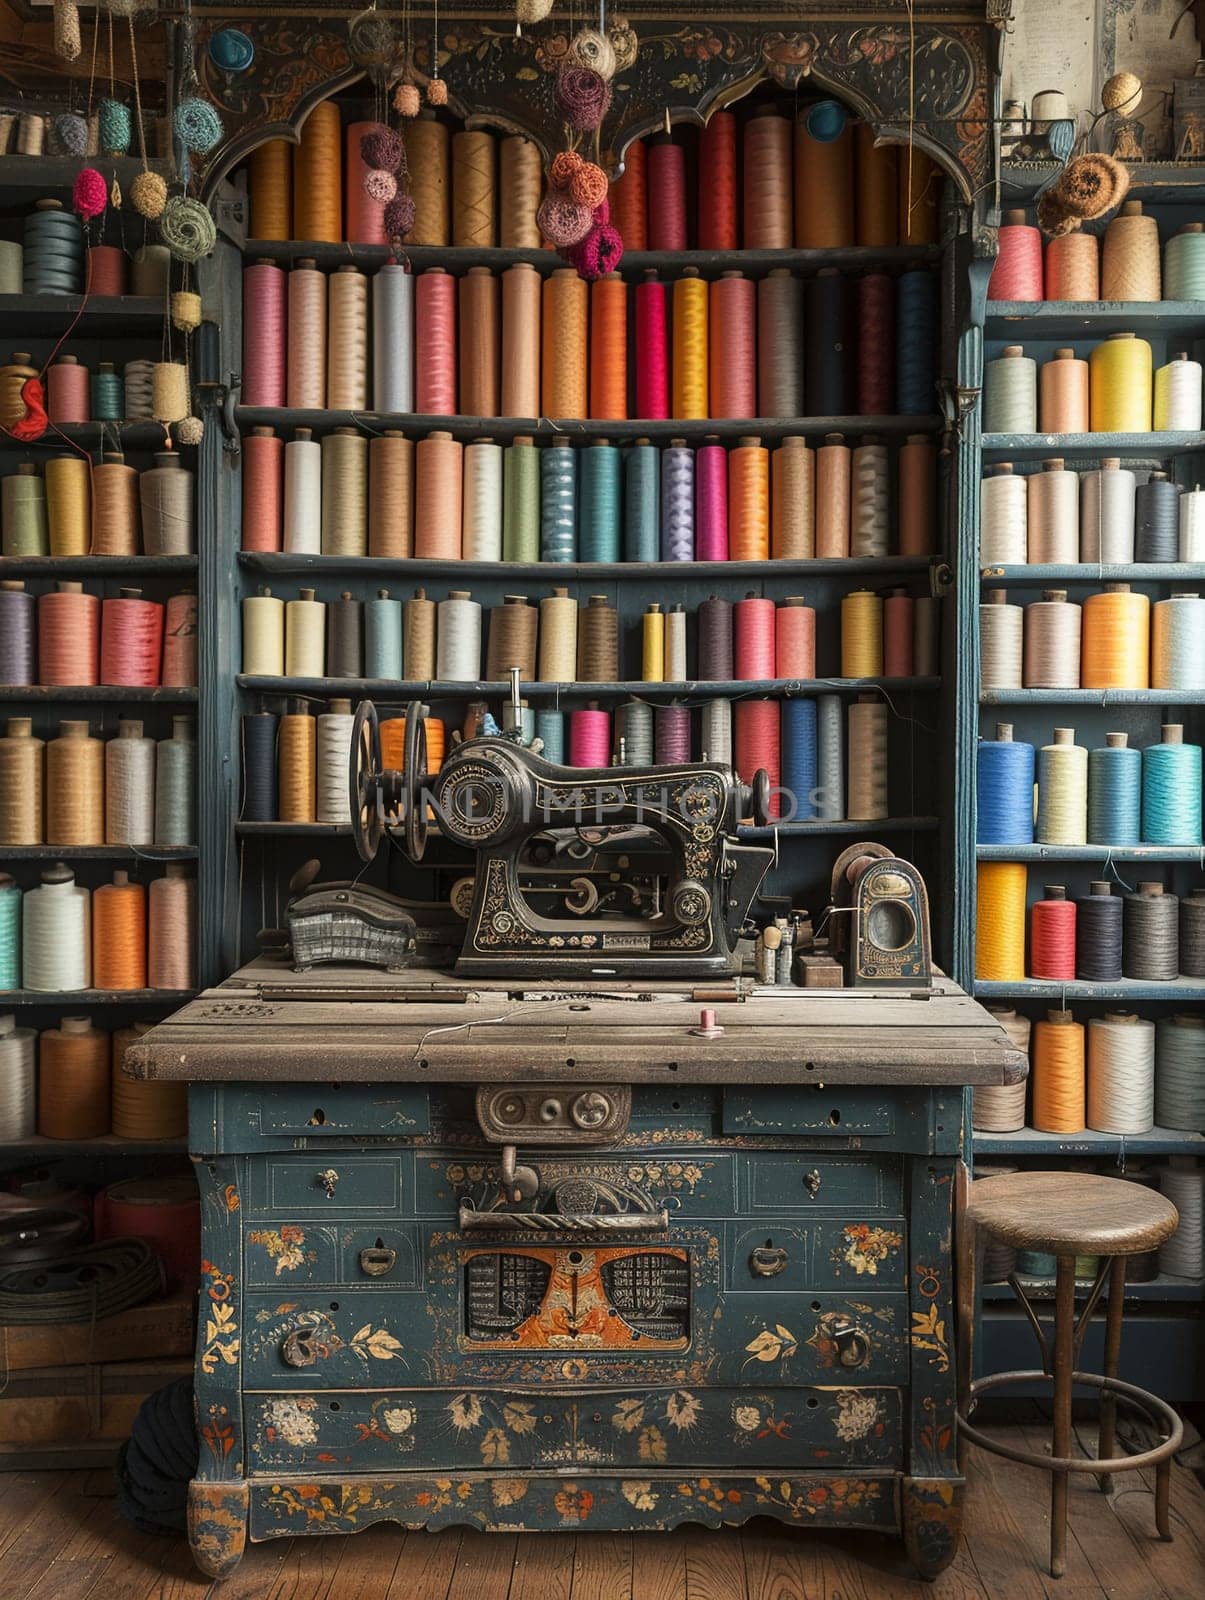 Vintage sewing room with antique machines and walls of colorful thread spools. by Benzoix